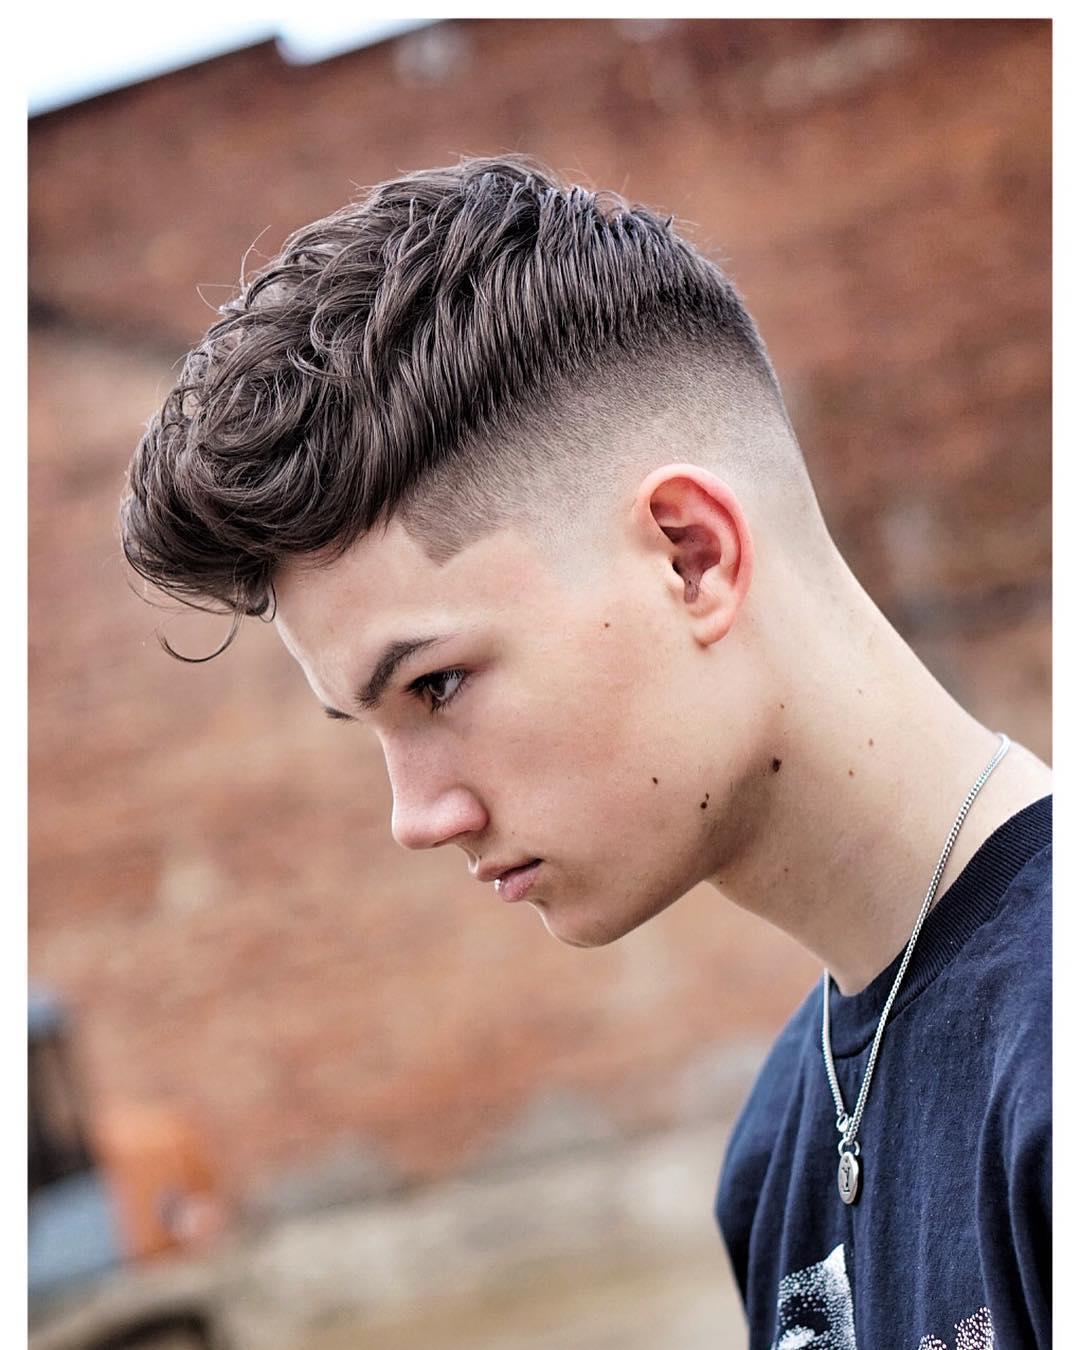 Boy Hairstyle Ideas - Best Hairstyles Ideas for Women and Men in 2023